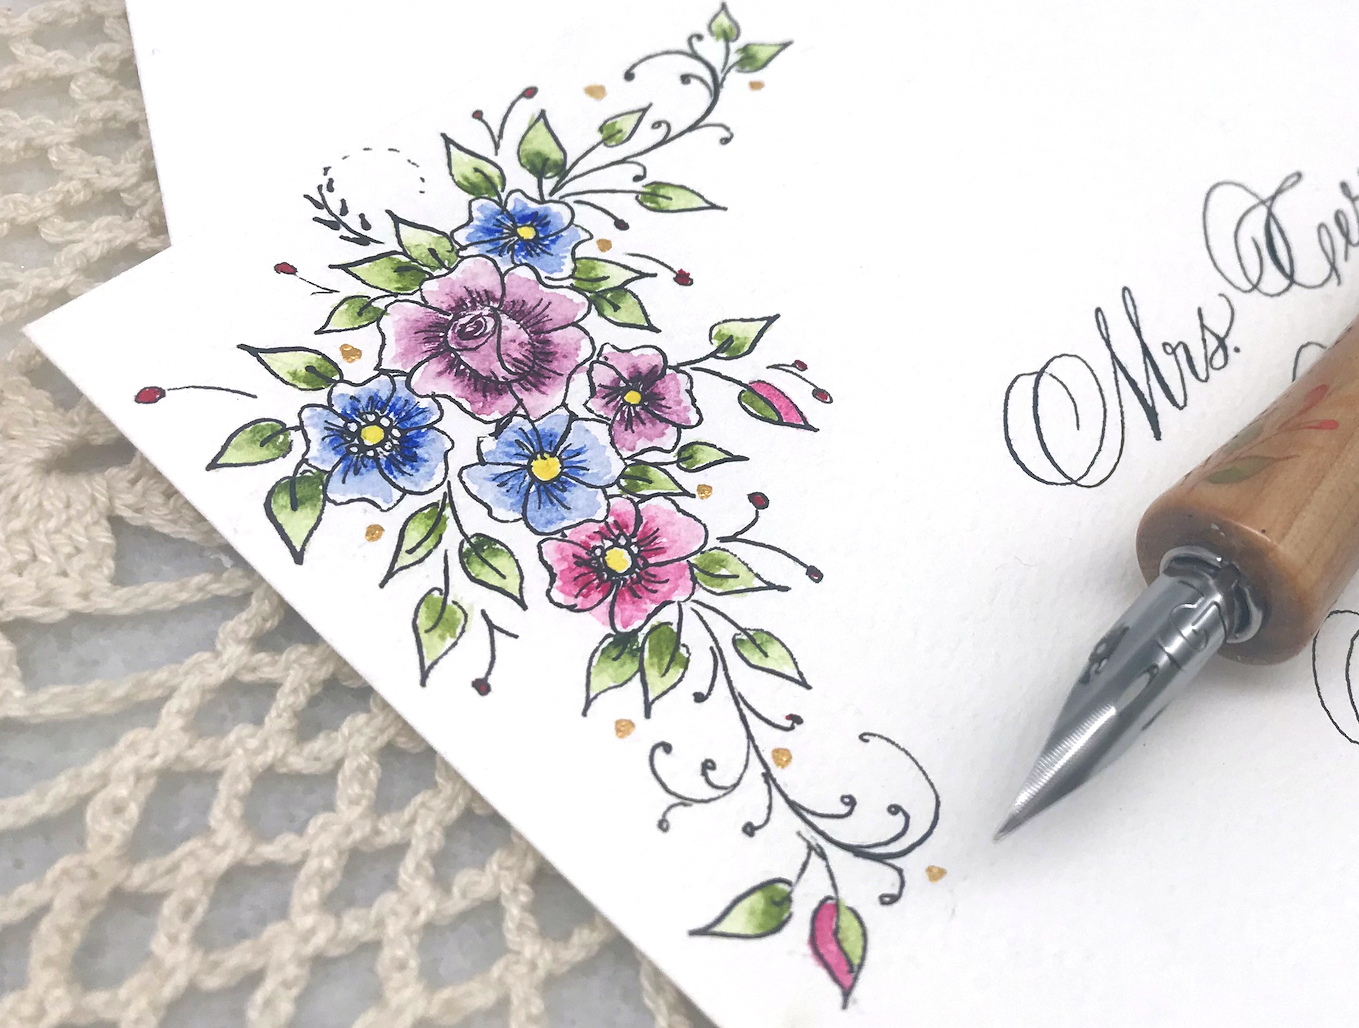 Fabulous Floral Calligraphy Flourishes: Guest Tutorial by Jodean Cooper